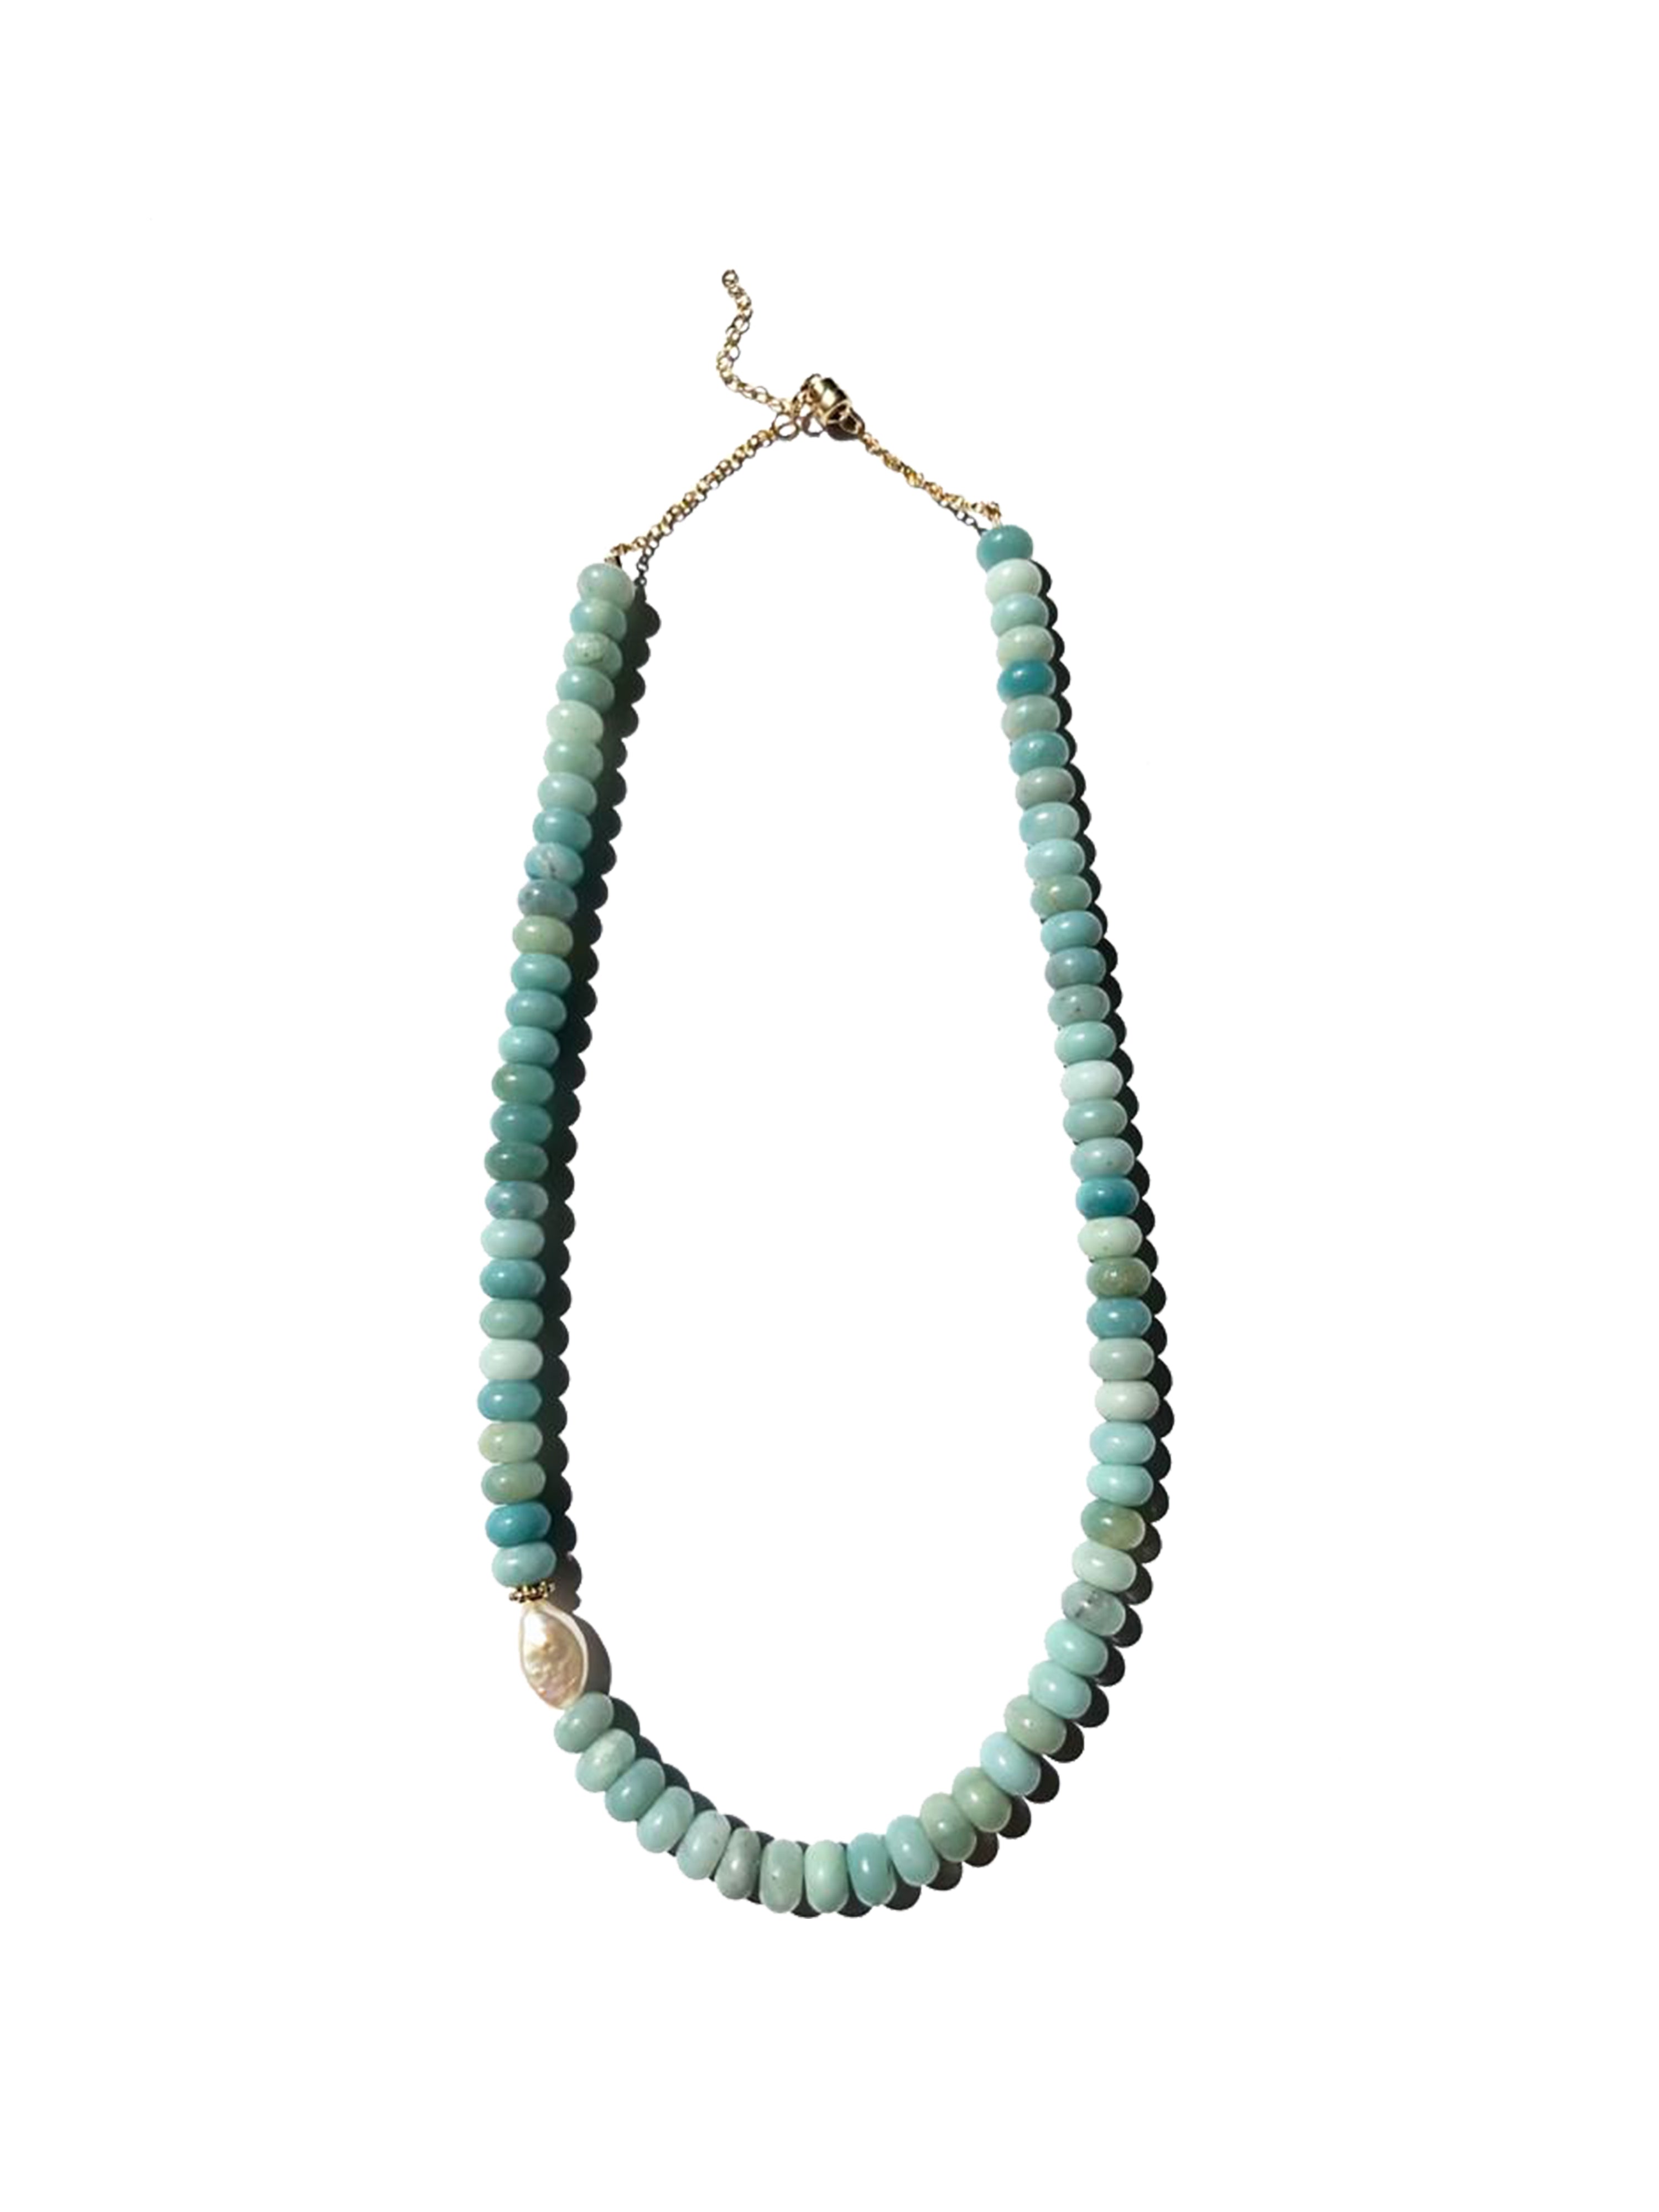 Free Your Soul Amazonite Necklace